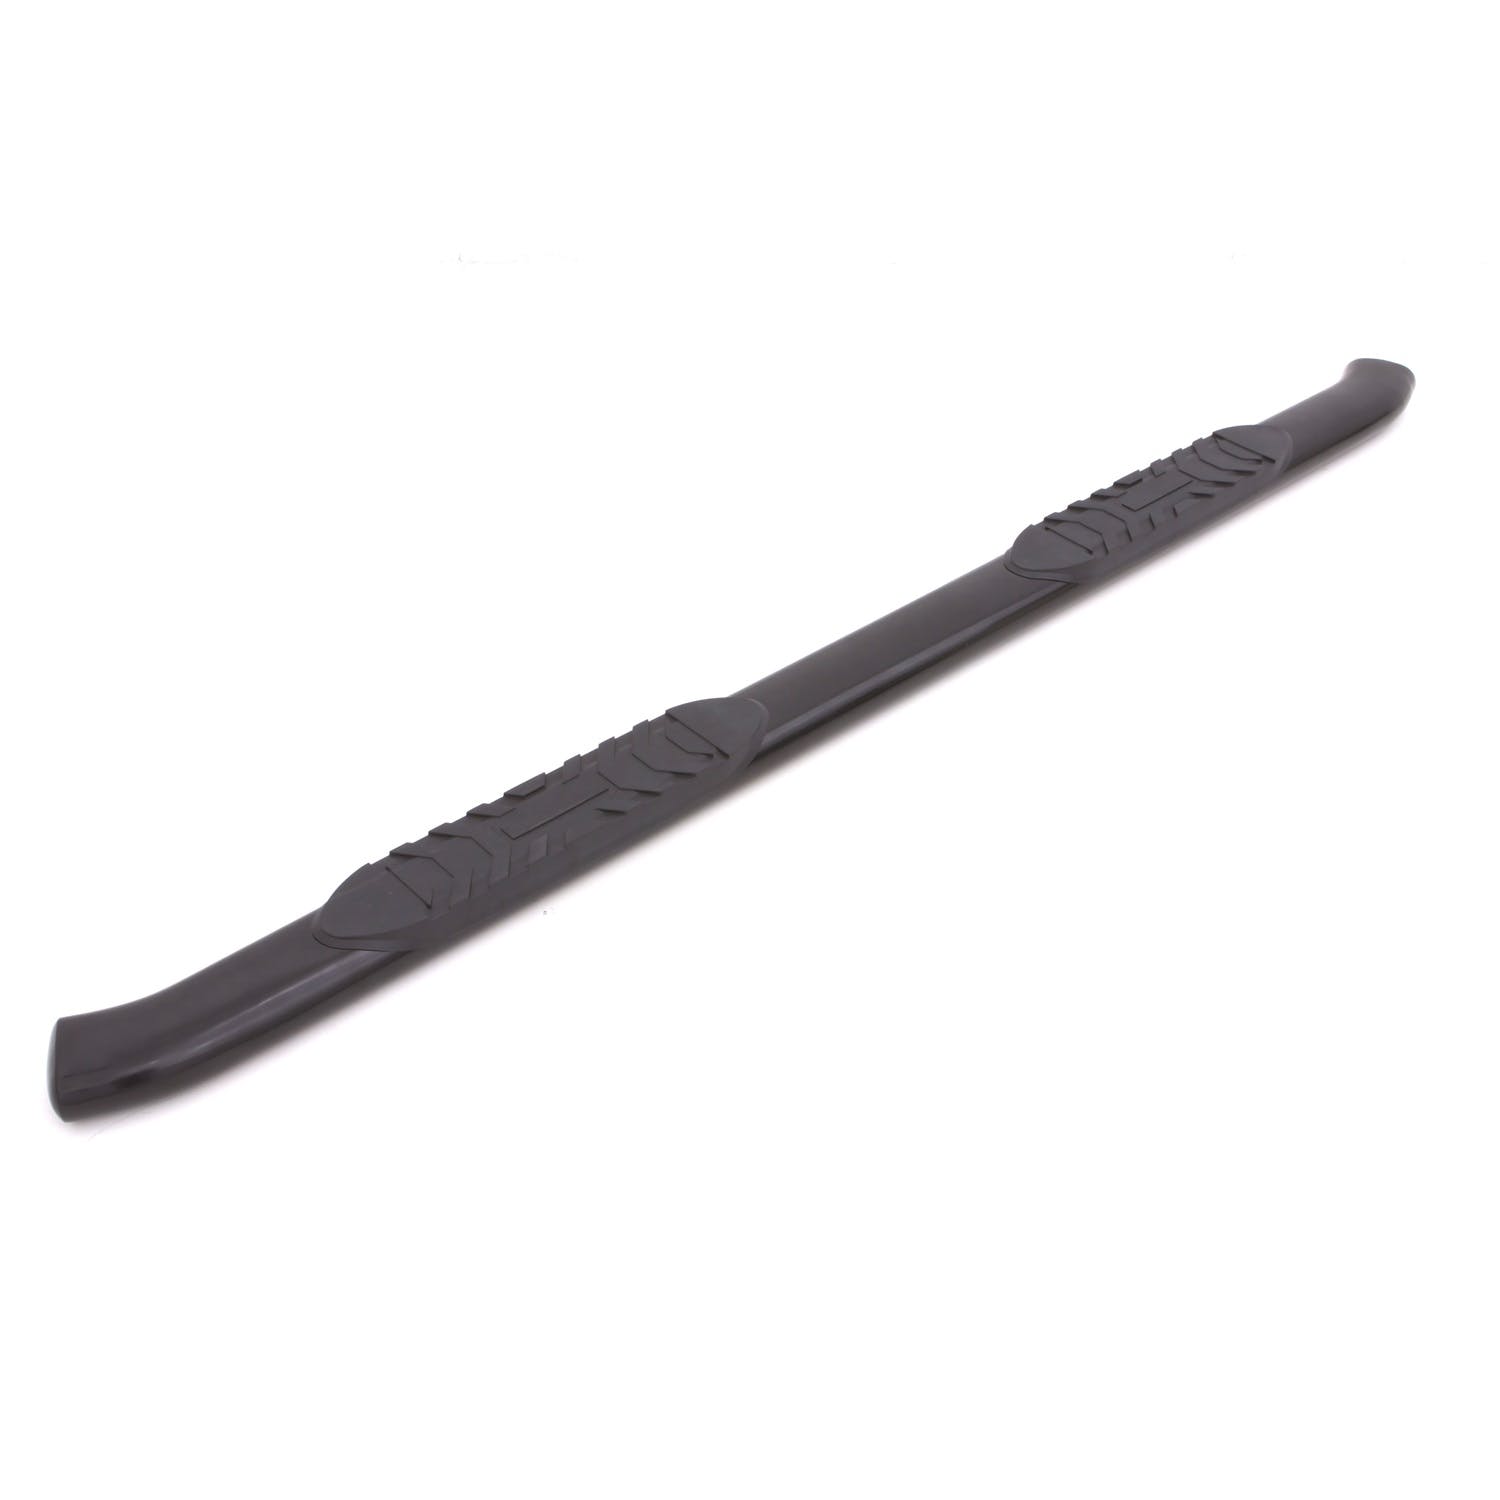 LUND 23854007 5 Inch Oval Curved Nerf Bar - Black 5 In OVAL CURVED STEEL